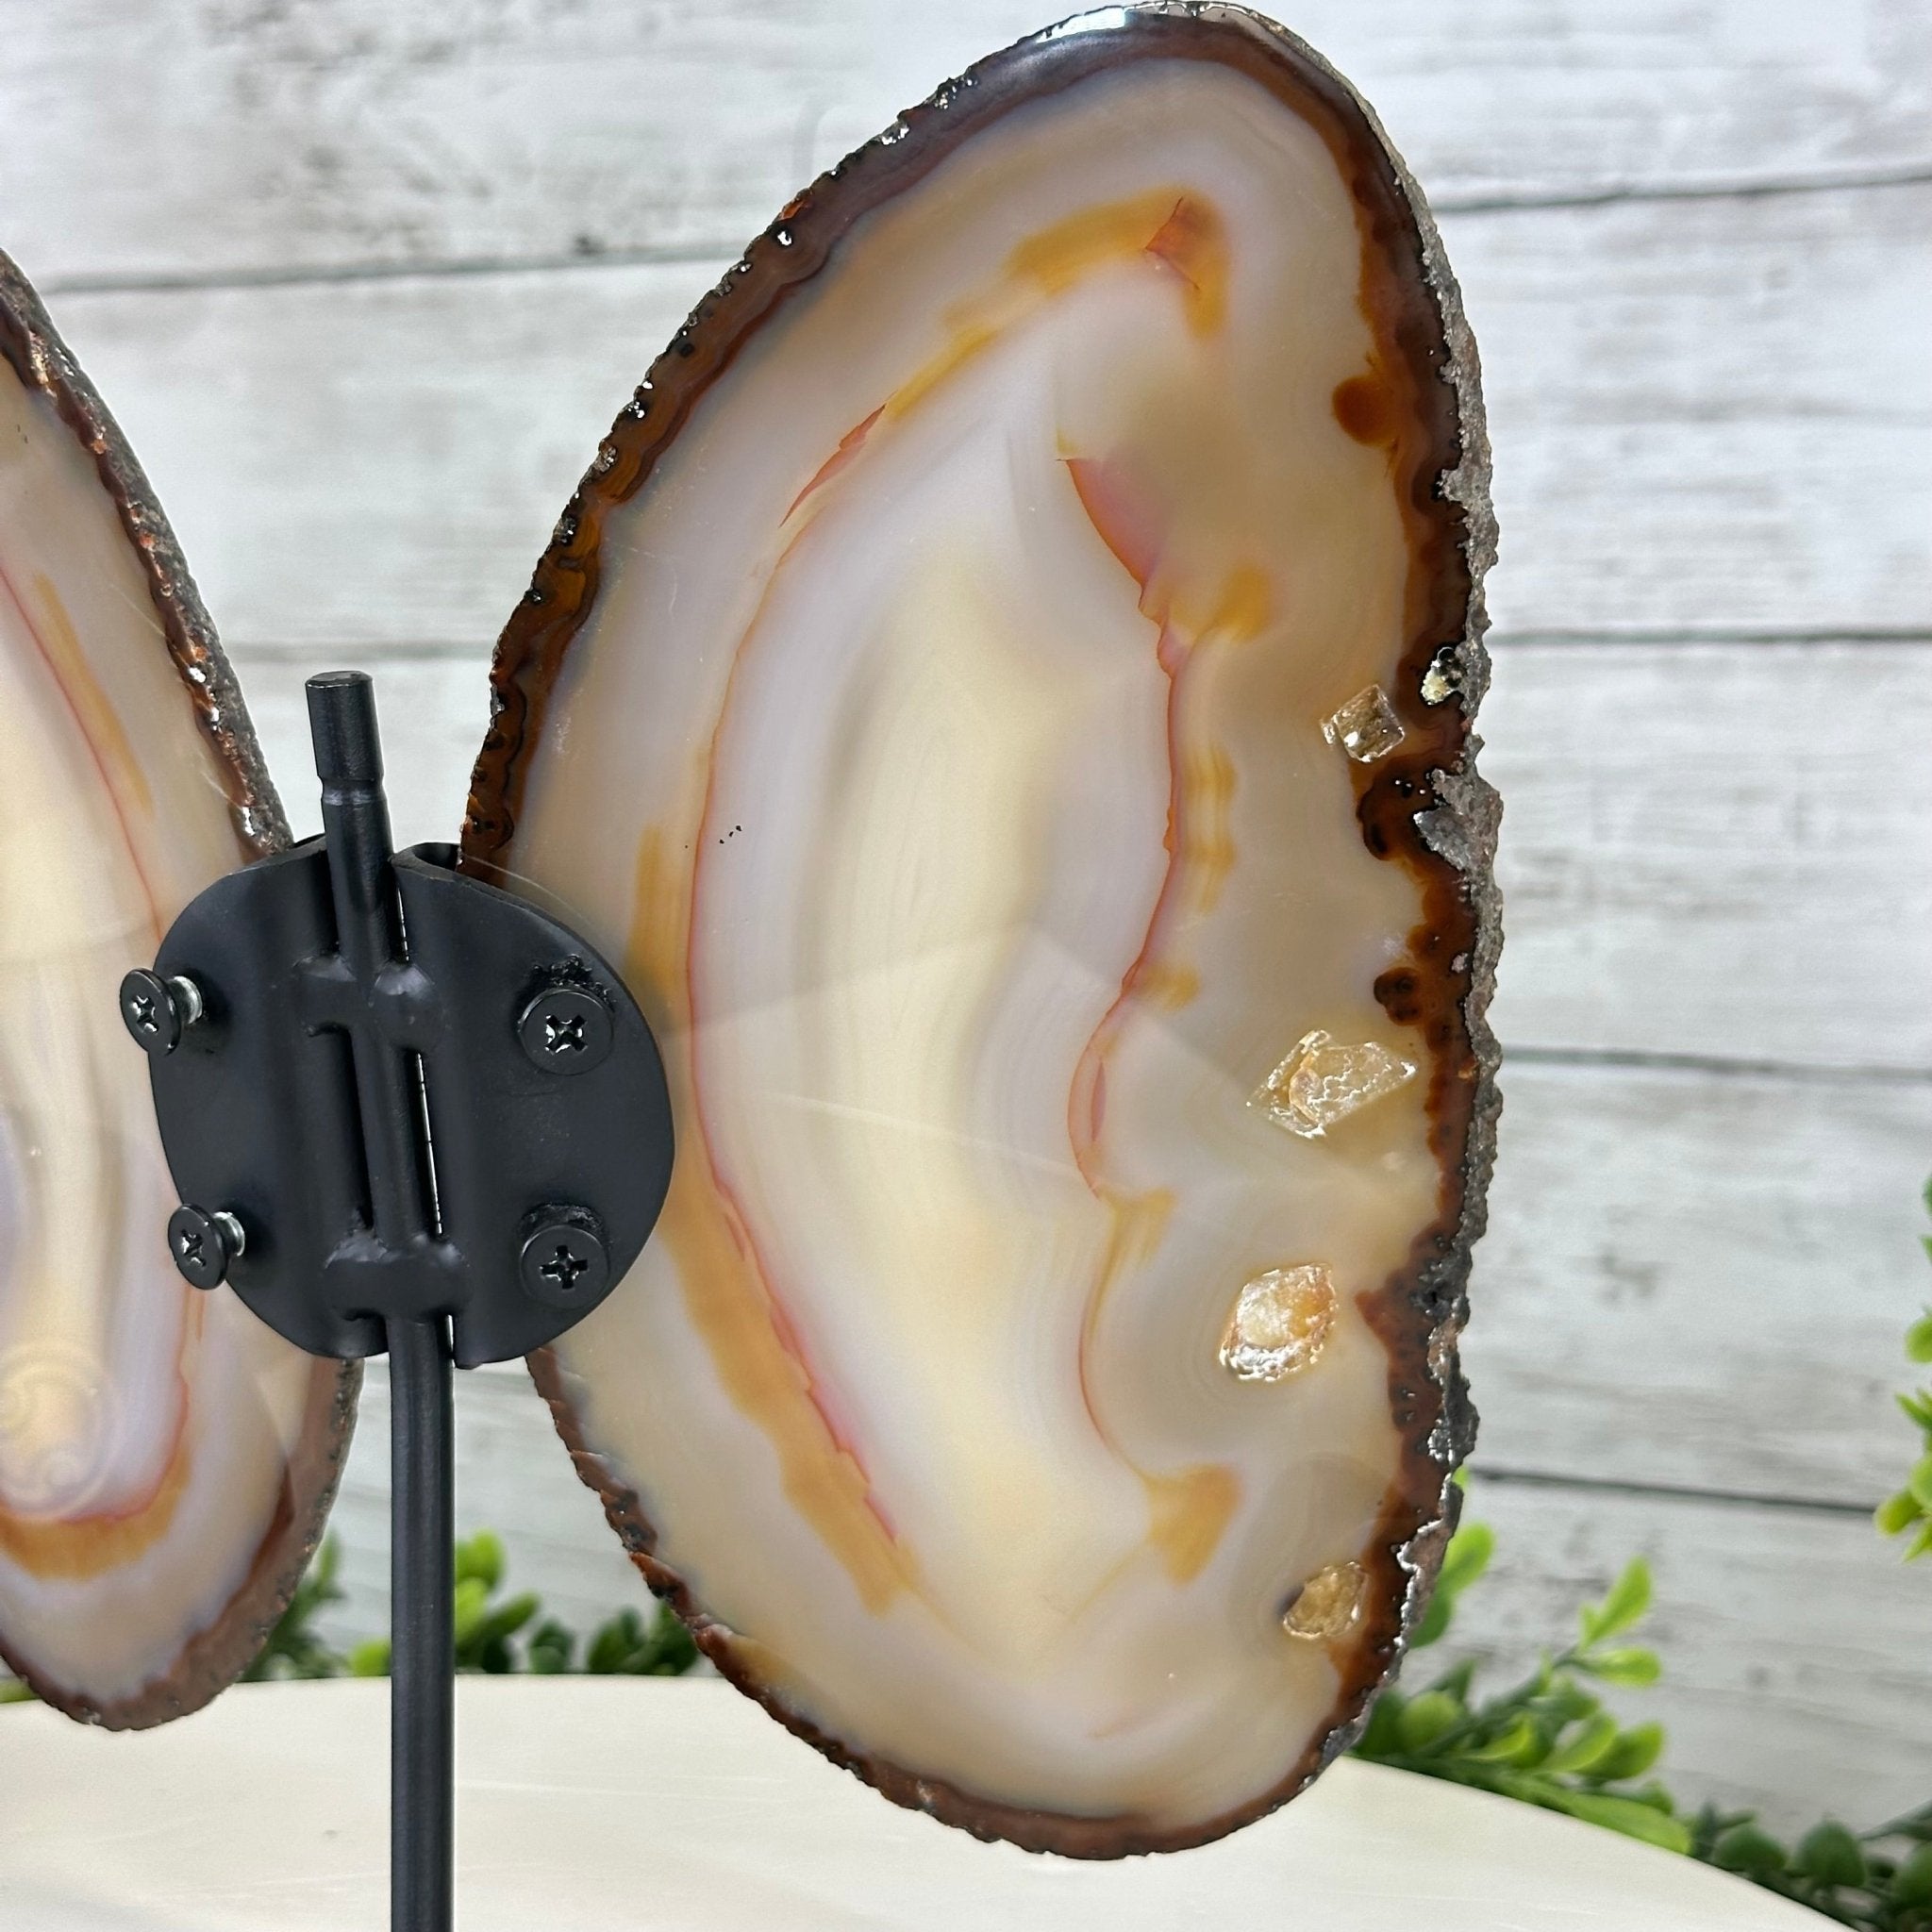 Natural Brazilian Agate "Butterfly Wings", 8.4" Tall #5050NA-108 - Brazil GemsBrazil GemsNatural Brazilian Agate "Butterfly Wings", 8.4" Tall #5050NA-108Agate Butterfly Wings5050NA-108